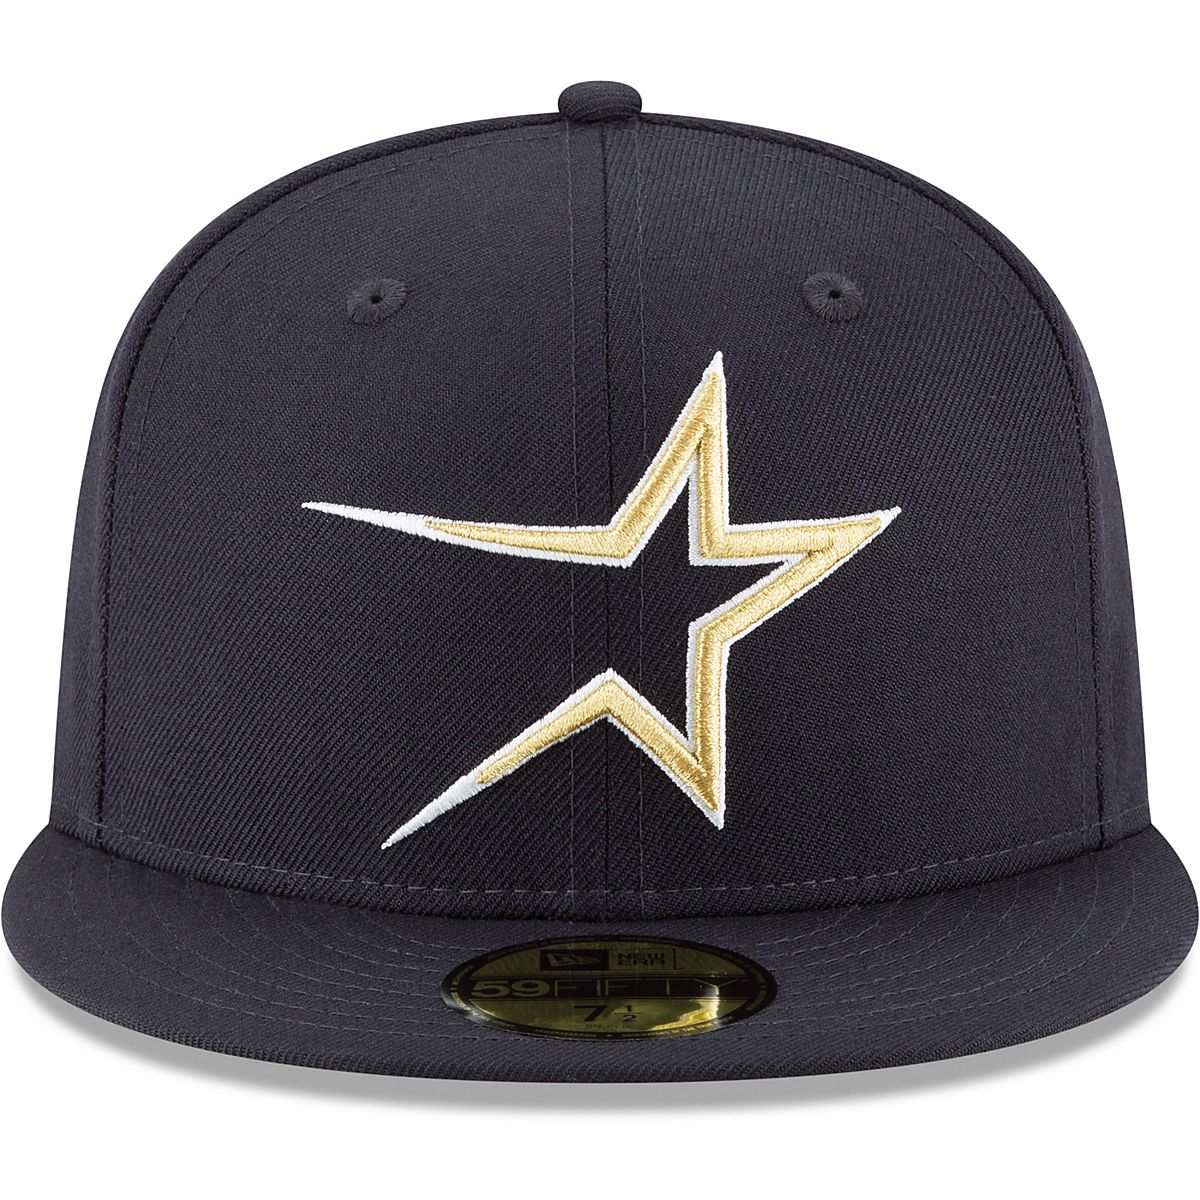 Houston Astros MLB Nike Cooperstown Collection Team Hat